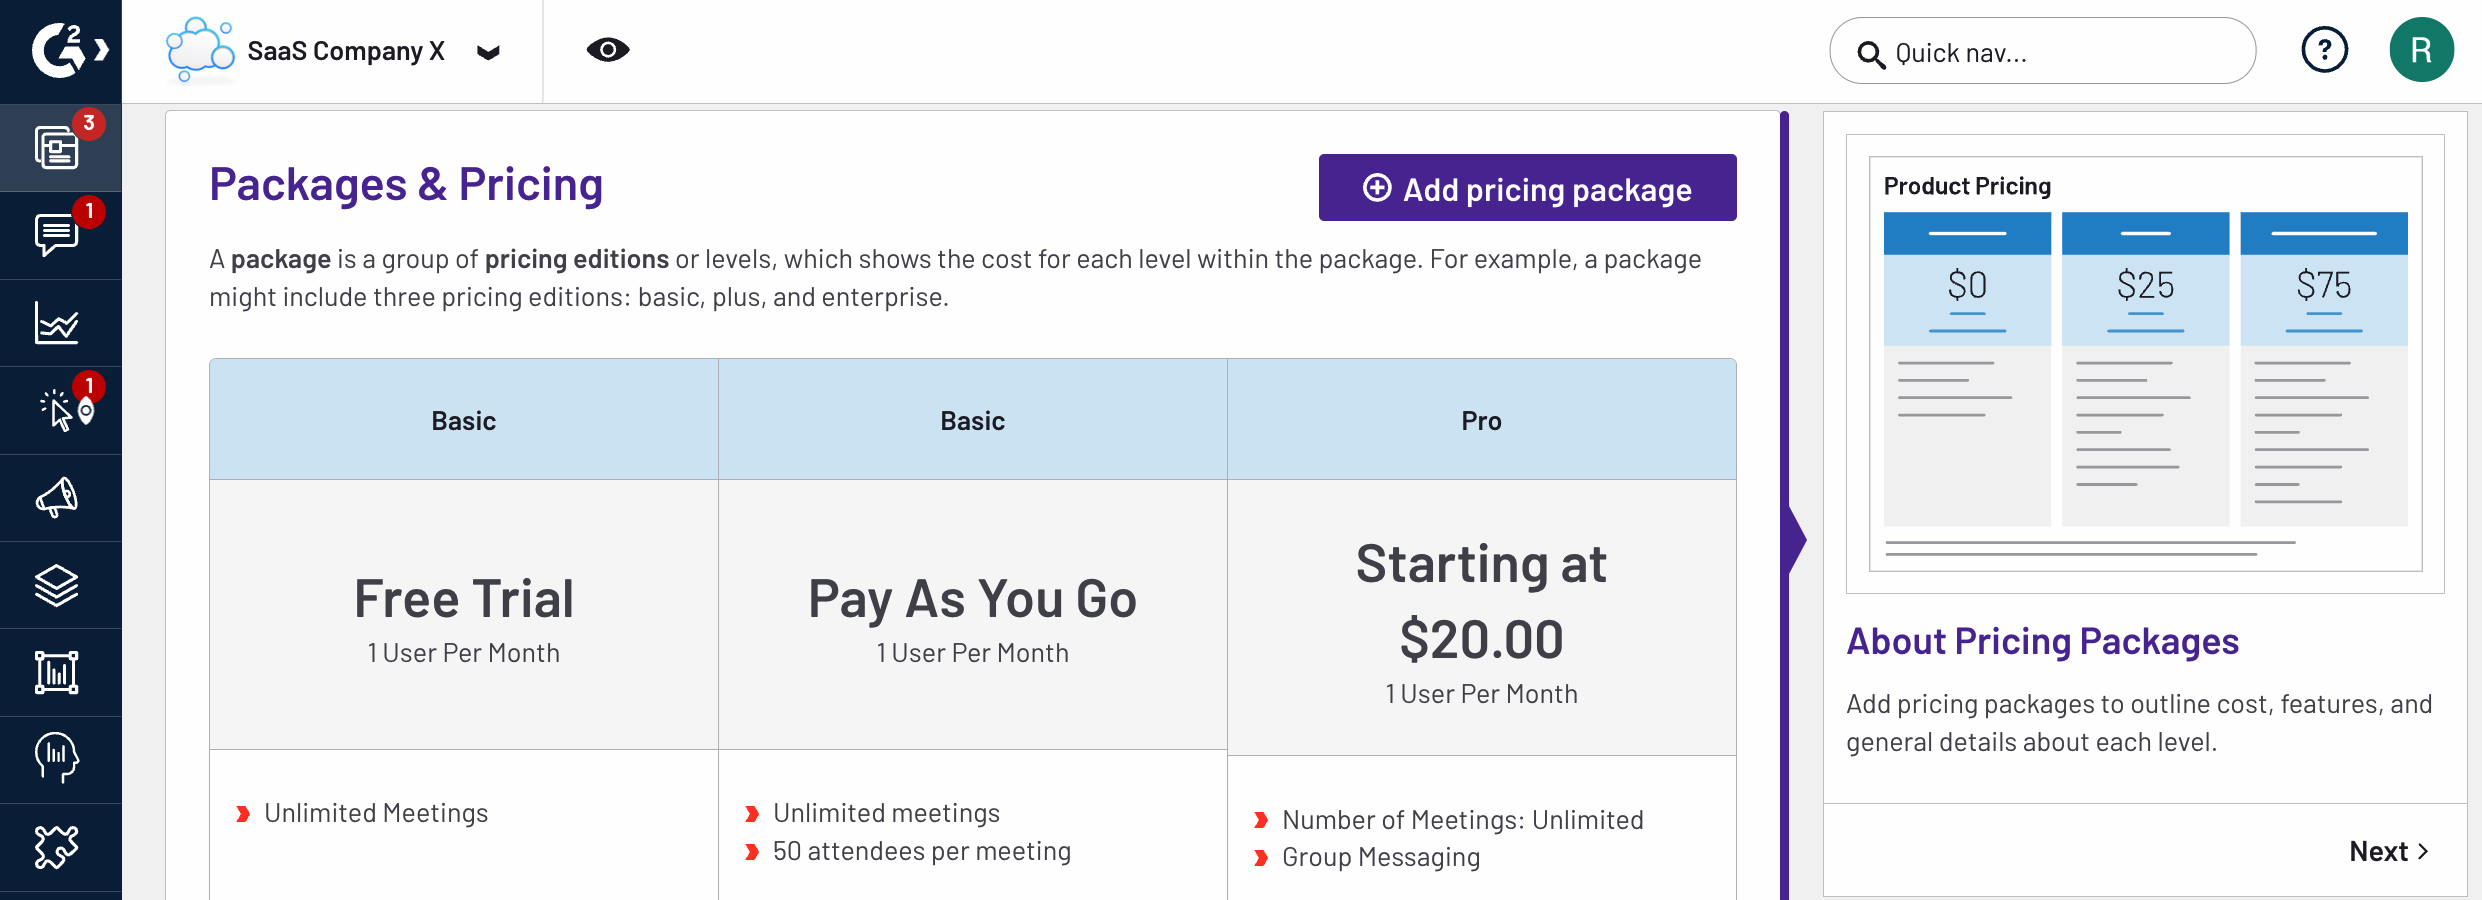 images showing packages and pricing tab in my.g2